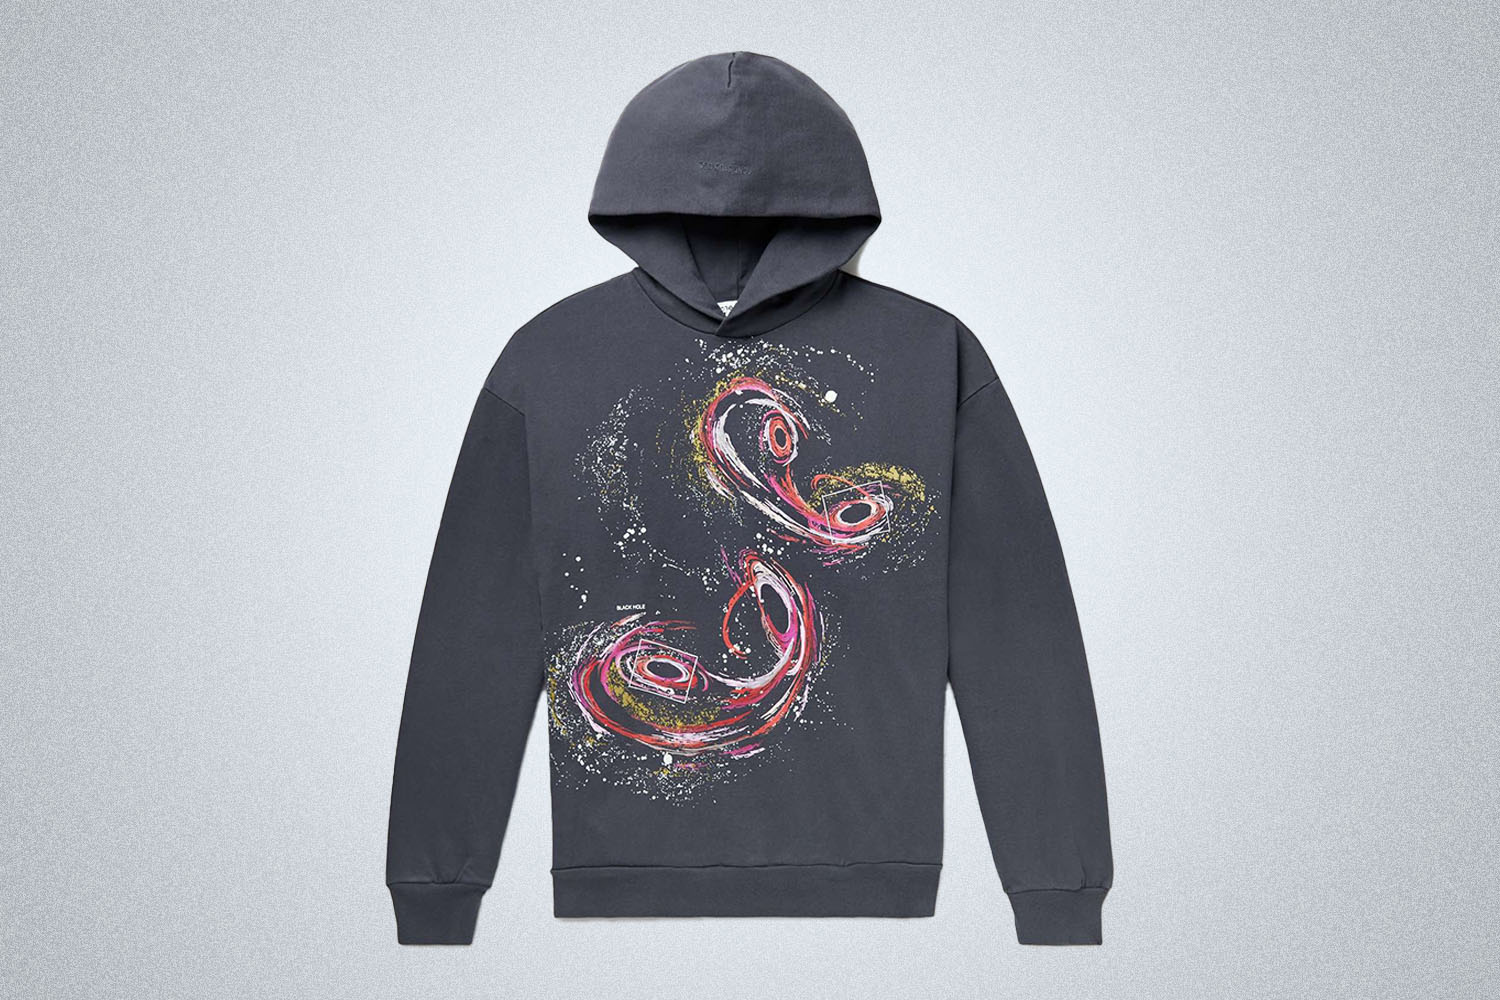 a grey hoodie with a swirl pink graphic